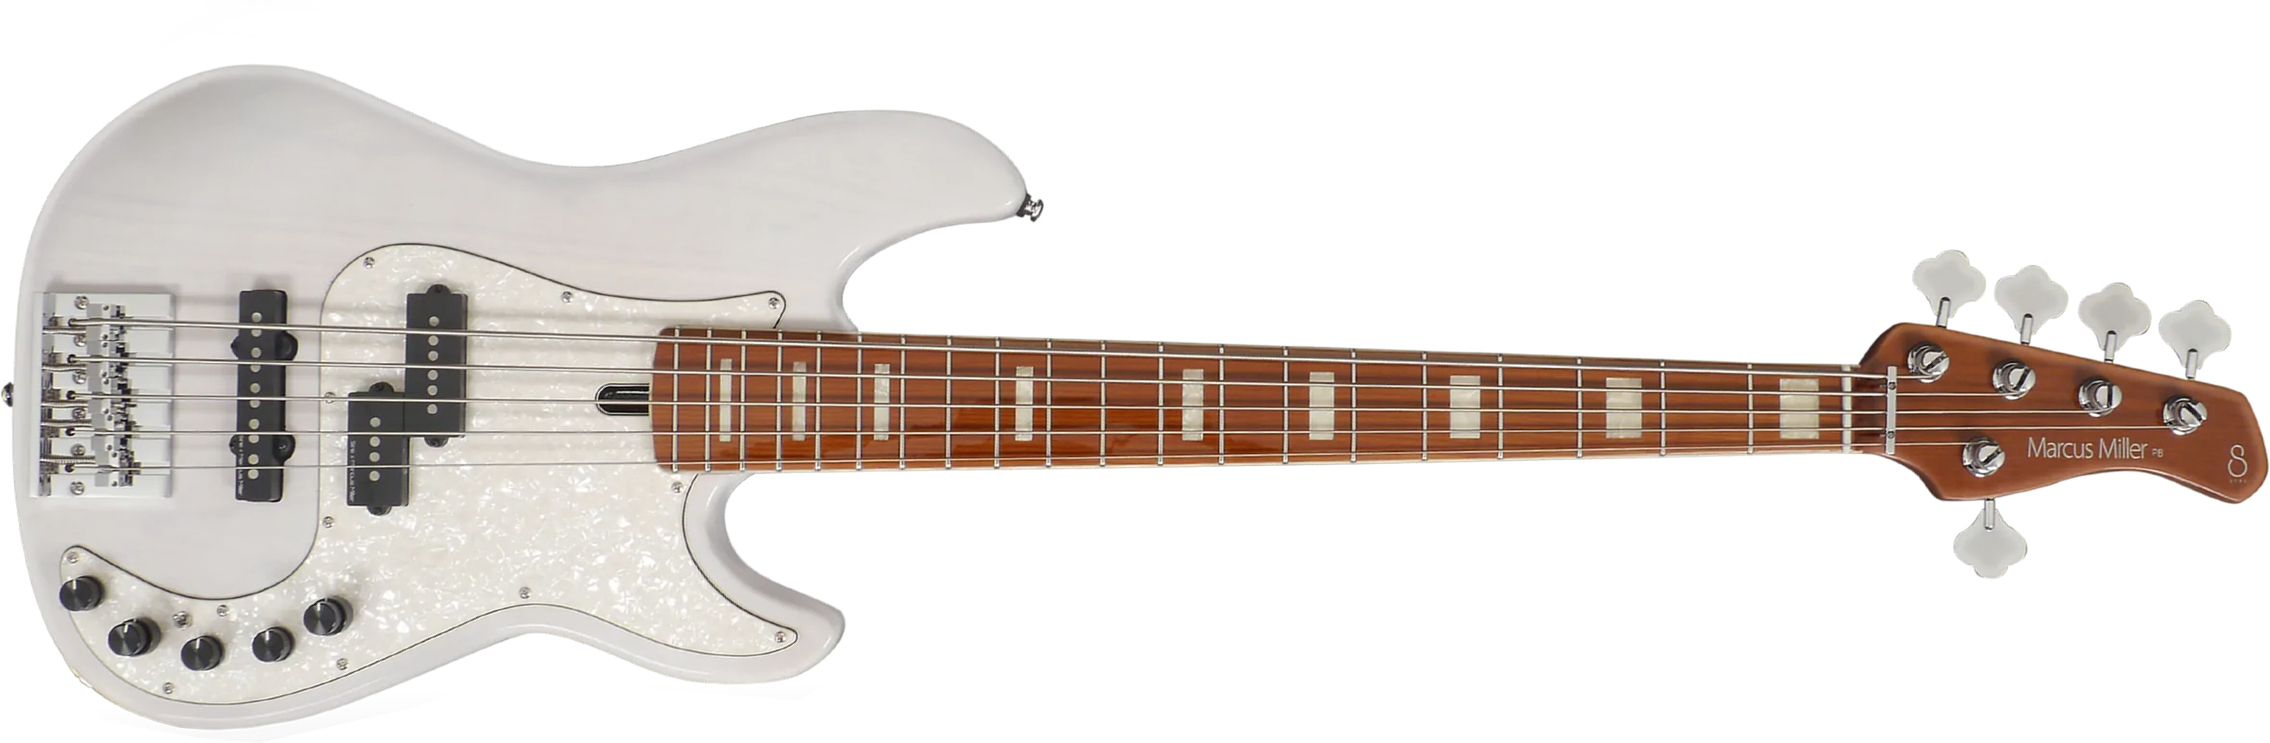 Marcus Miller P8 5st 5c Active Mn - White Blonde - Solid body electric bass - Main picture